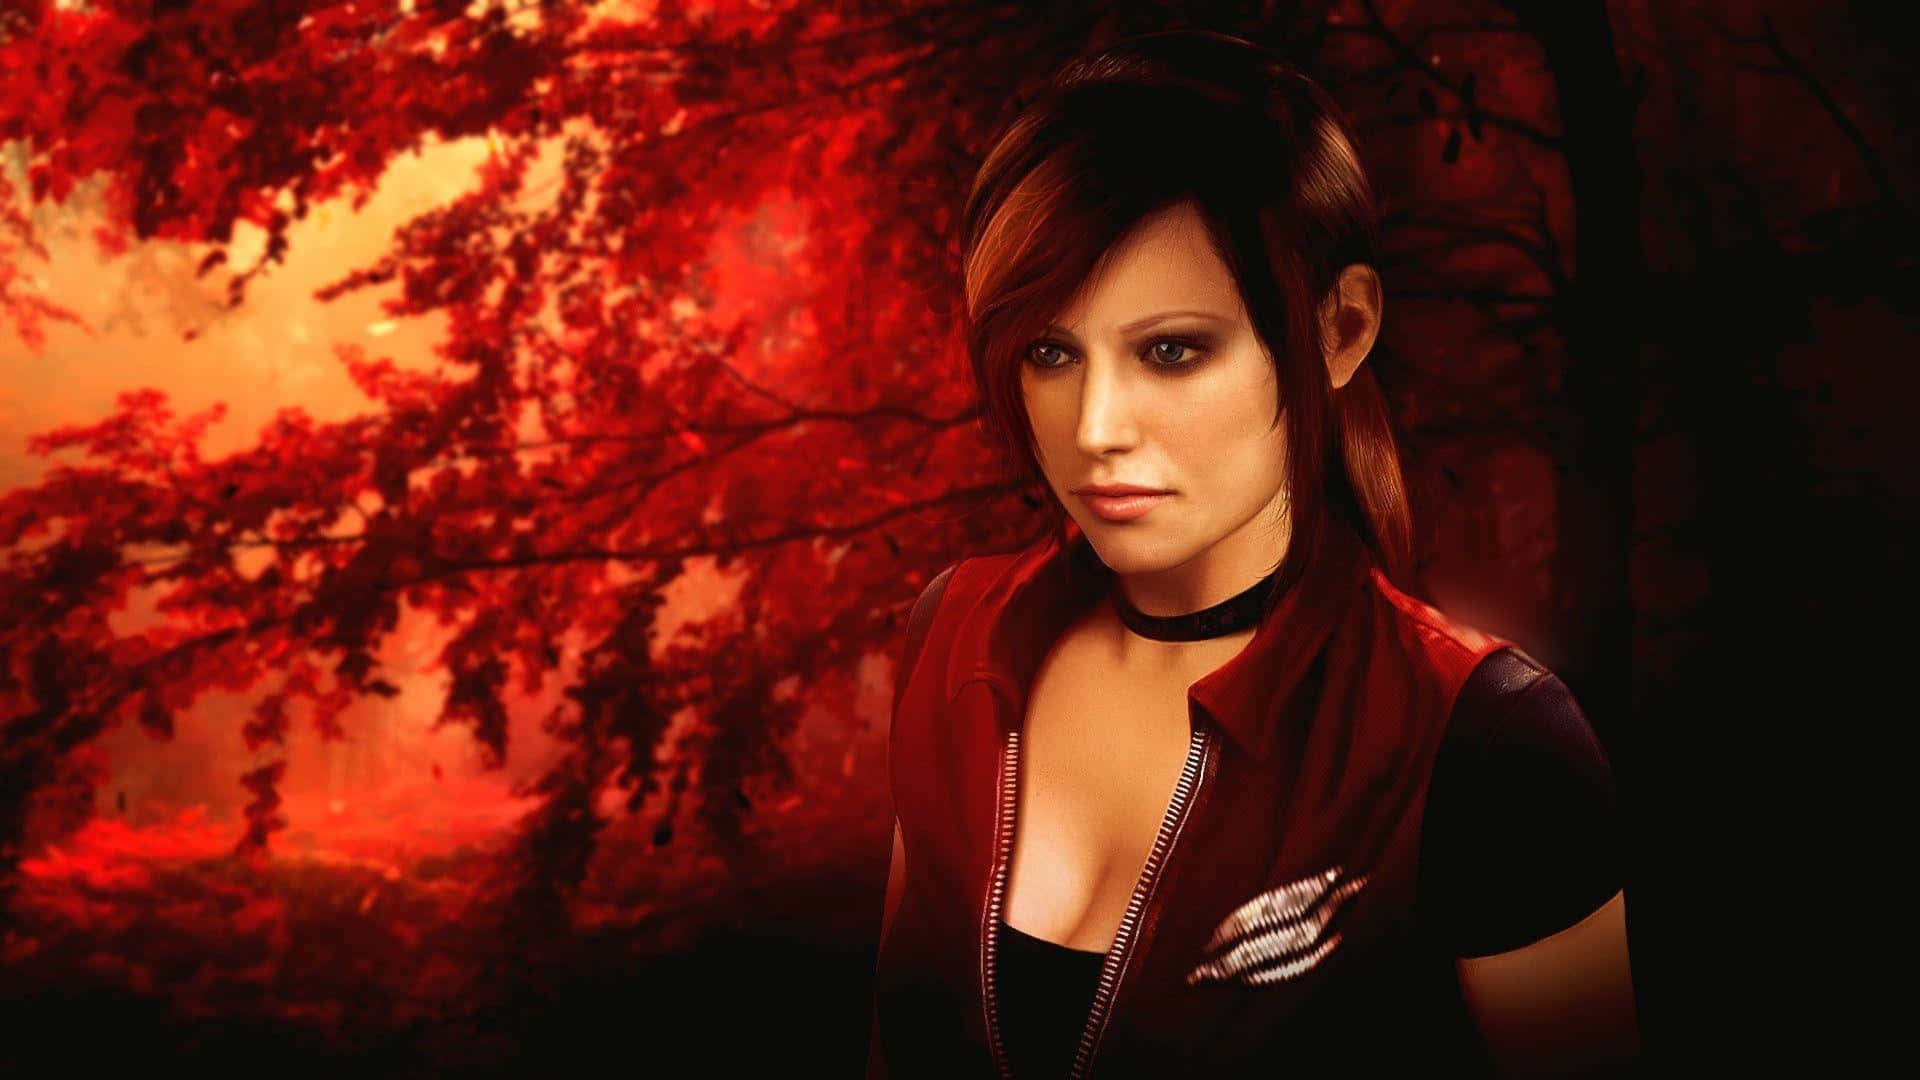 Claire Redfield - Fearless Female Survivor In The Horror World Of Resident Evil Wallpaper